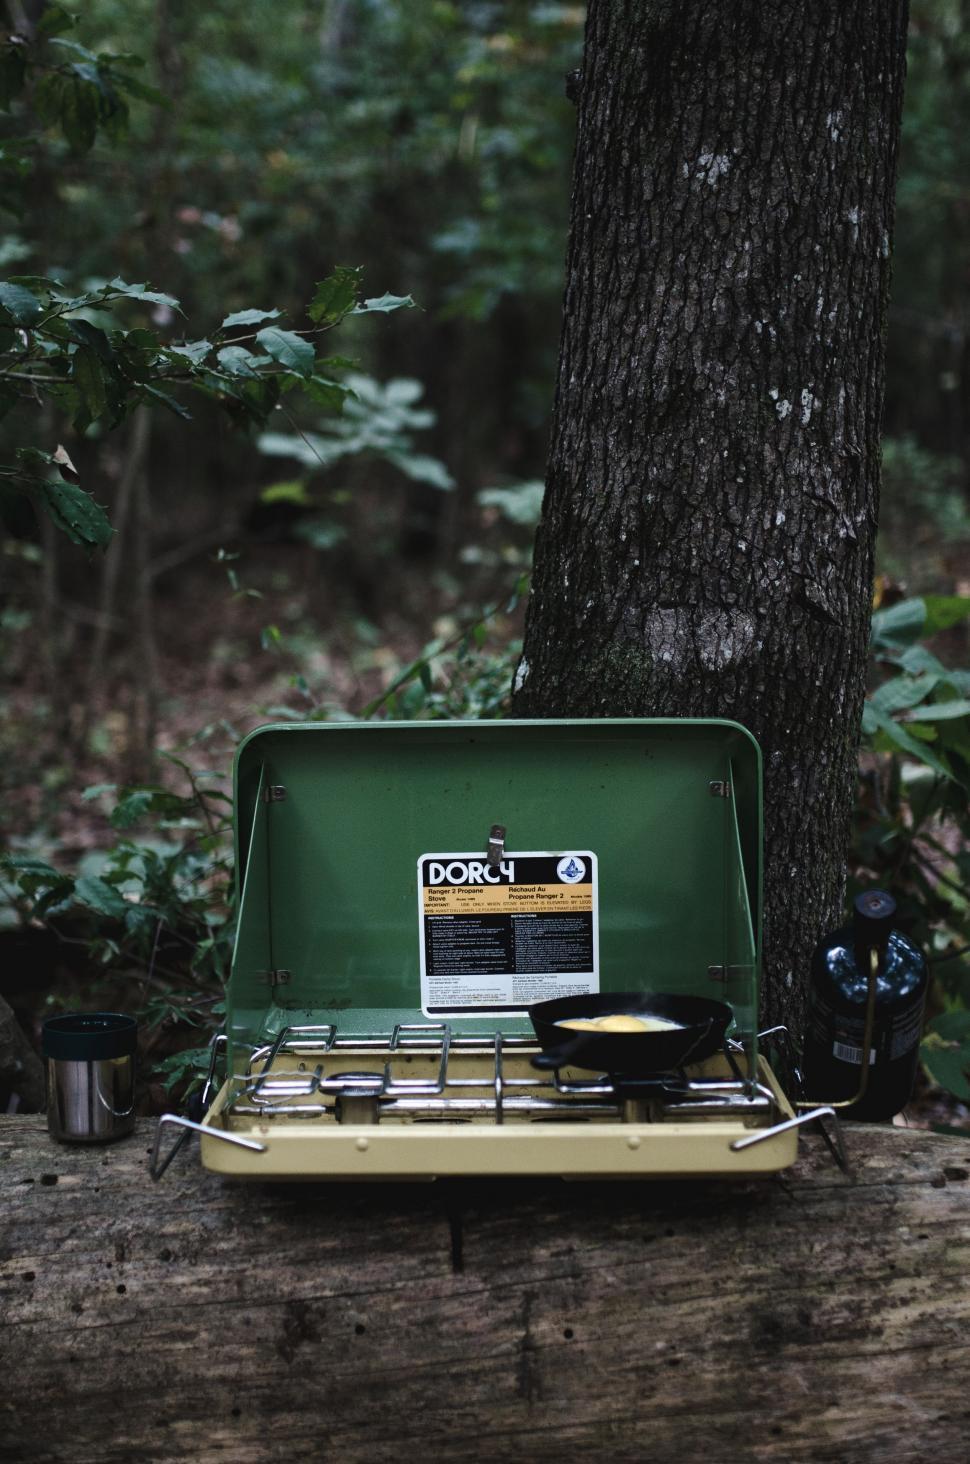 Free Image of Small Stove in Forest Clearing 